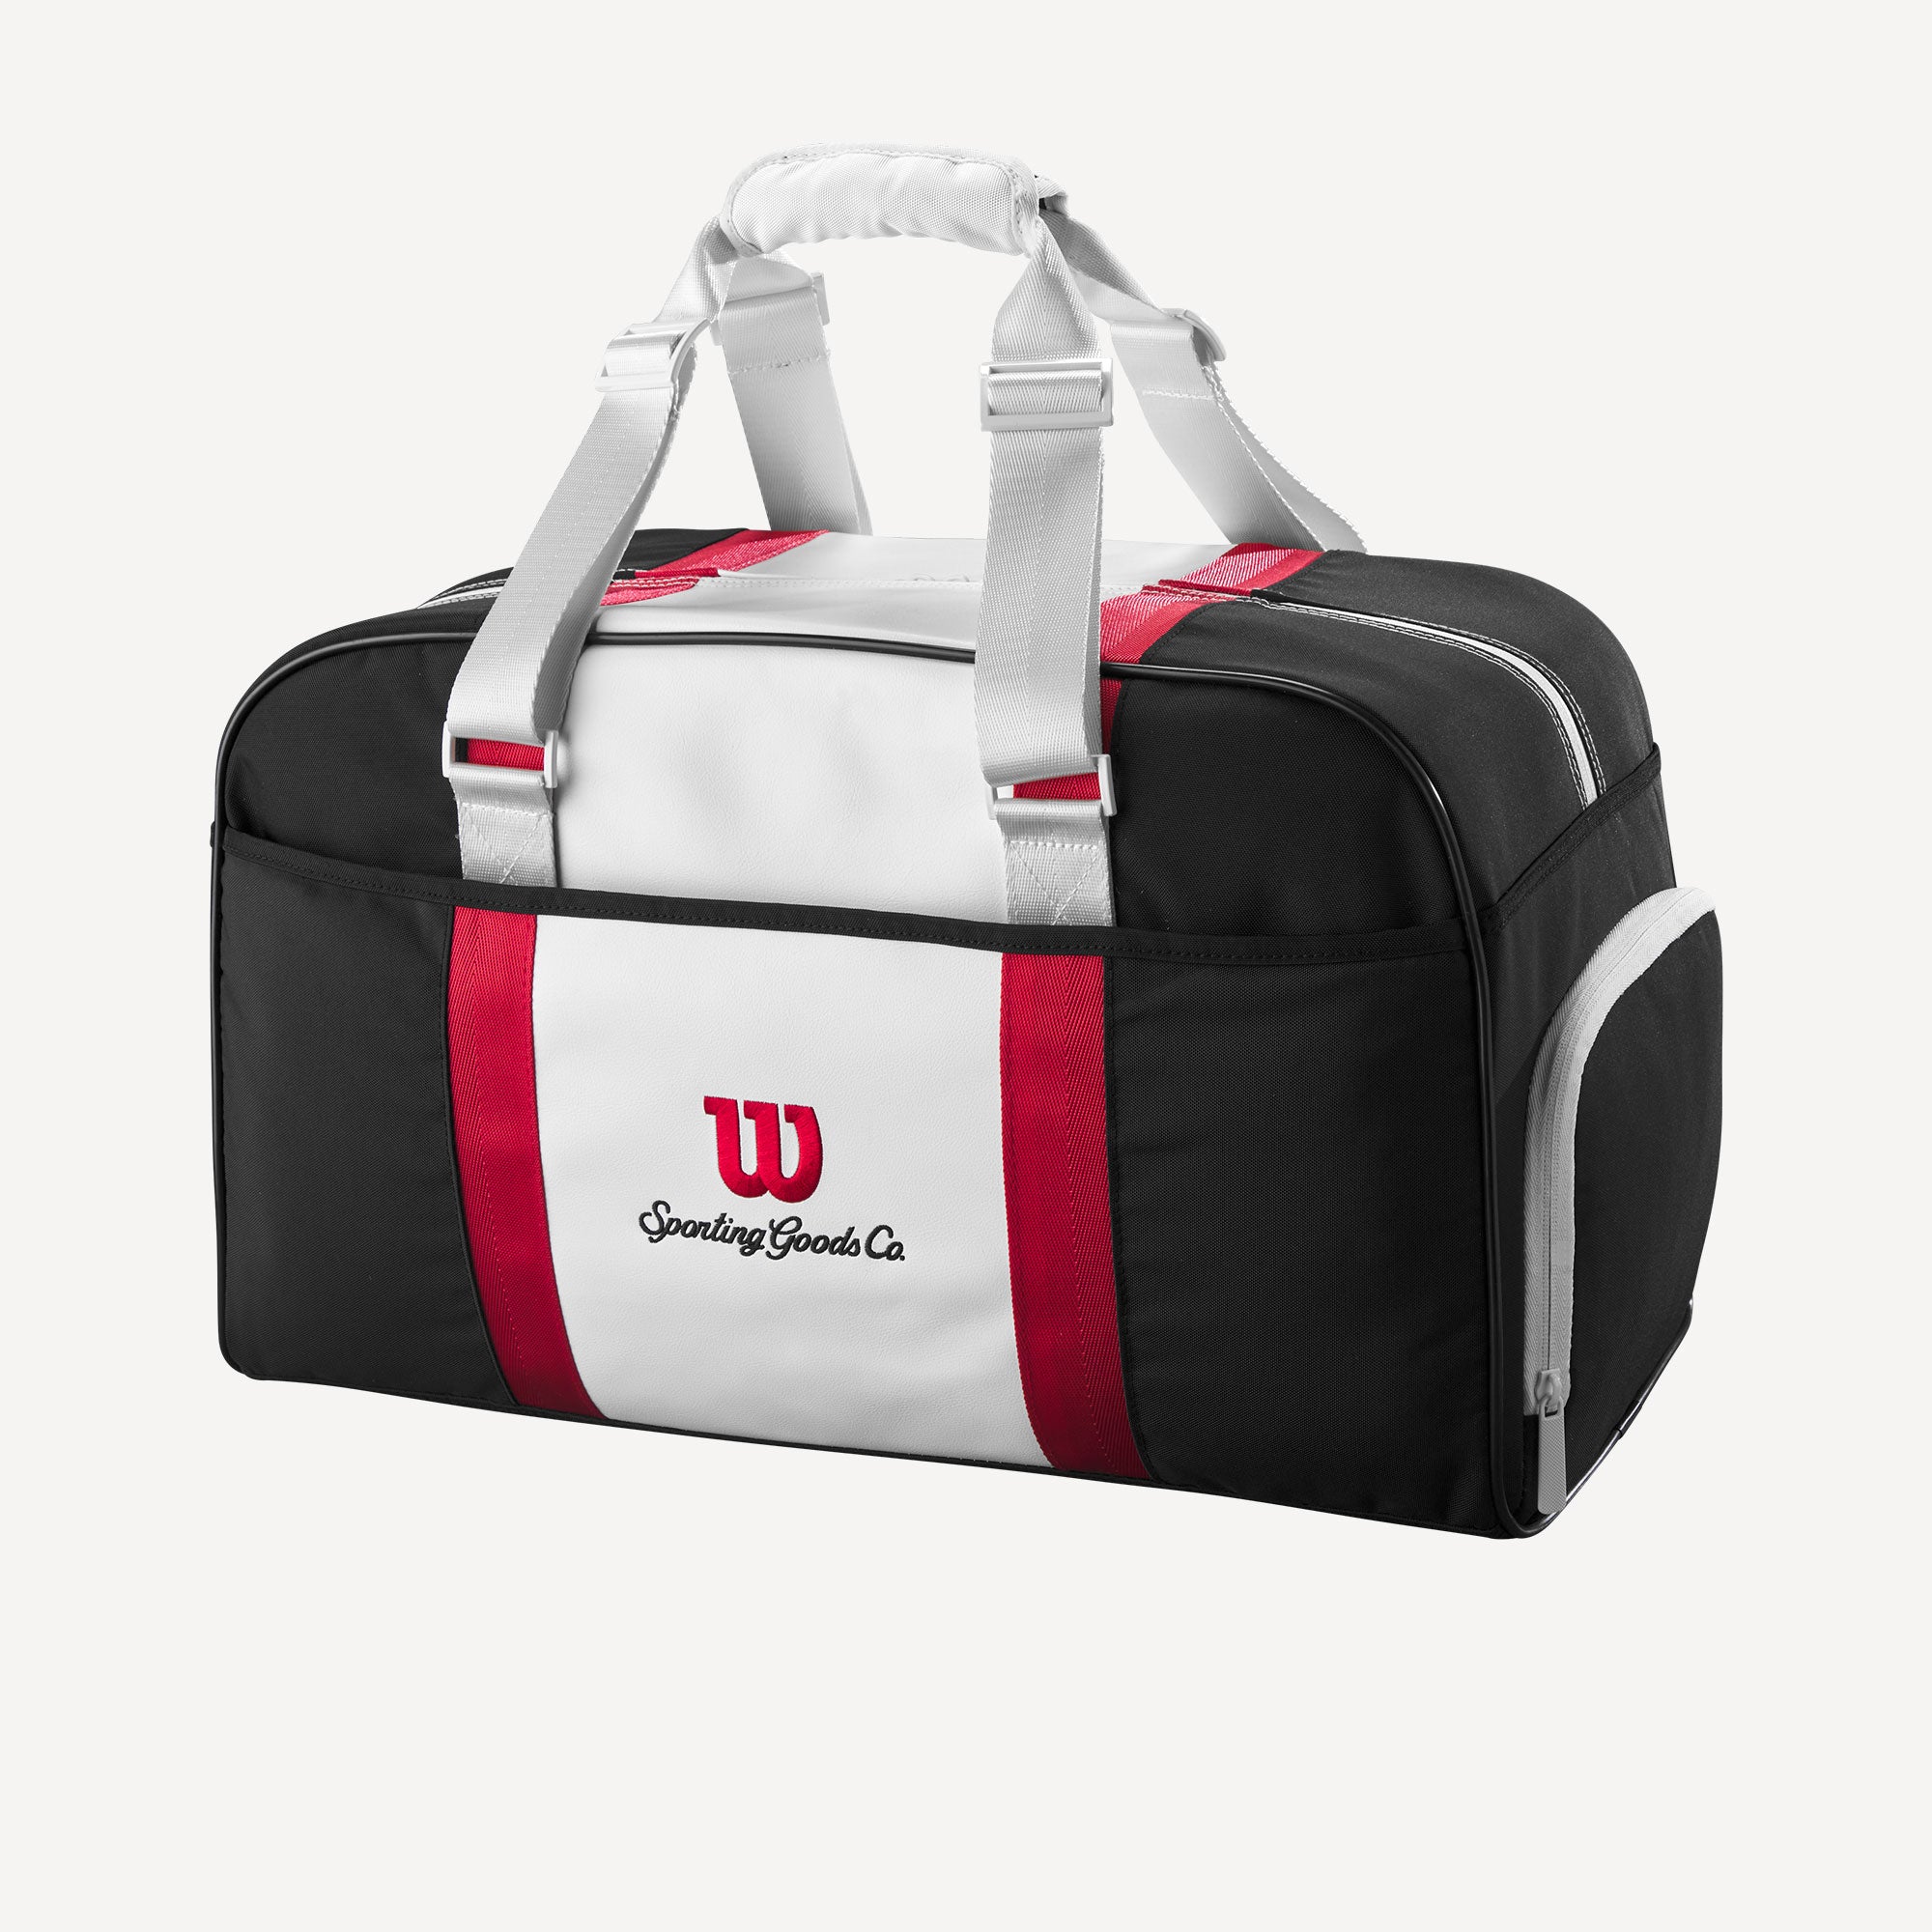 Wilson Courage Collection Small Duffle Tennis Bag - Black/White/Red (1)